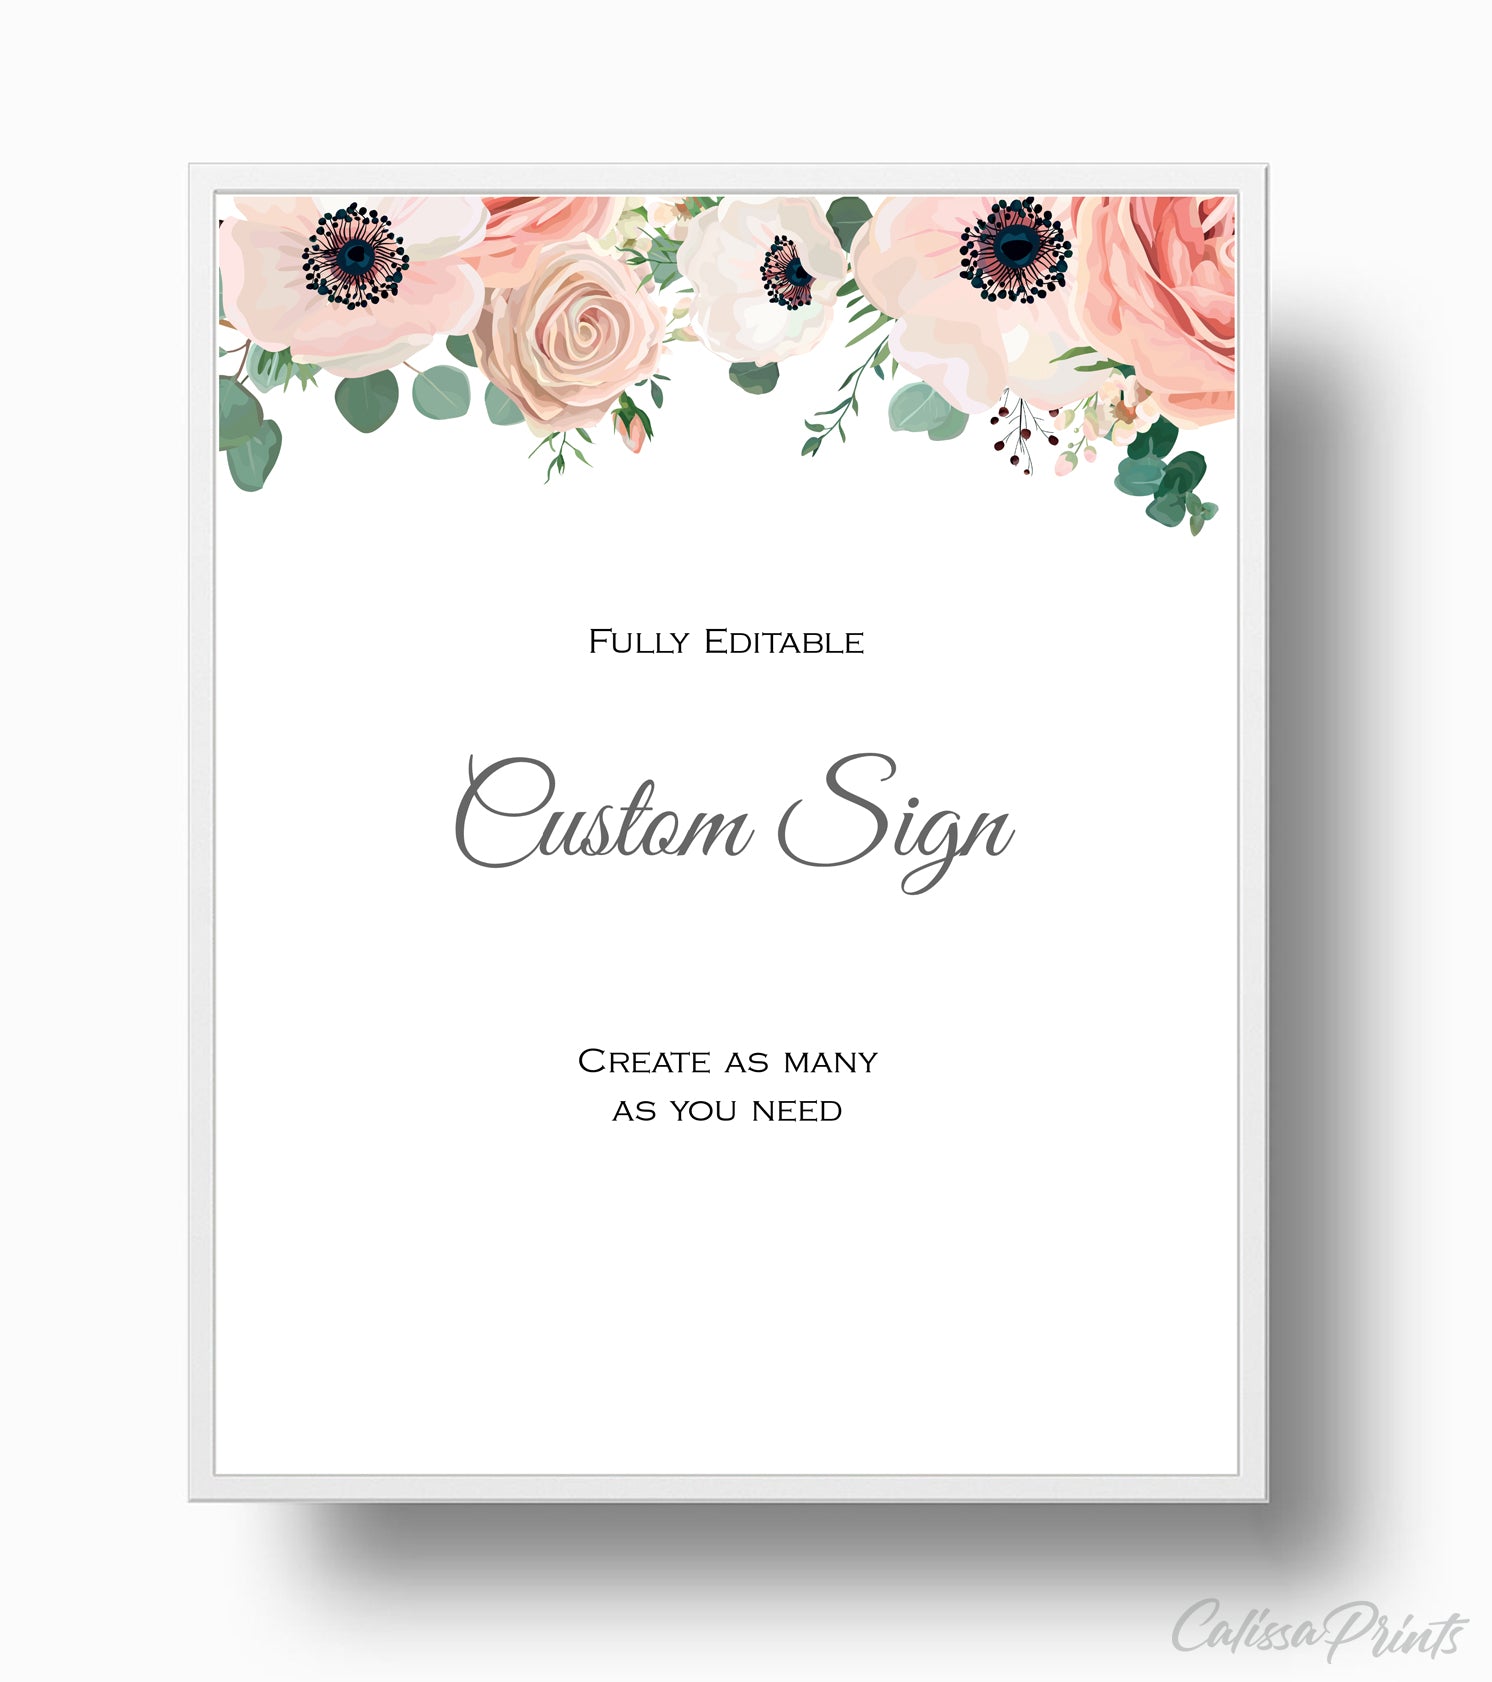 Wedding Custom Sign Printable Templates, Anemone Rose Flower Green Leaves Design, Amelia Collection WED02 - CalissaPrints